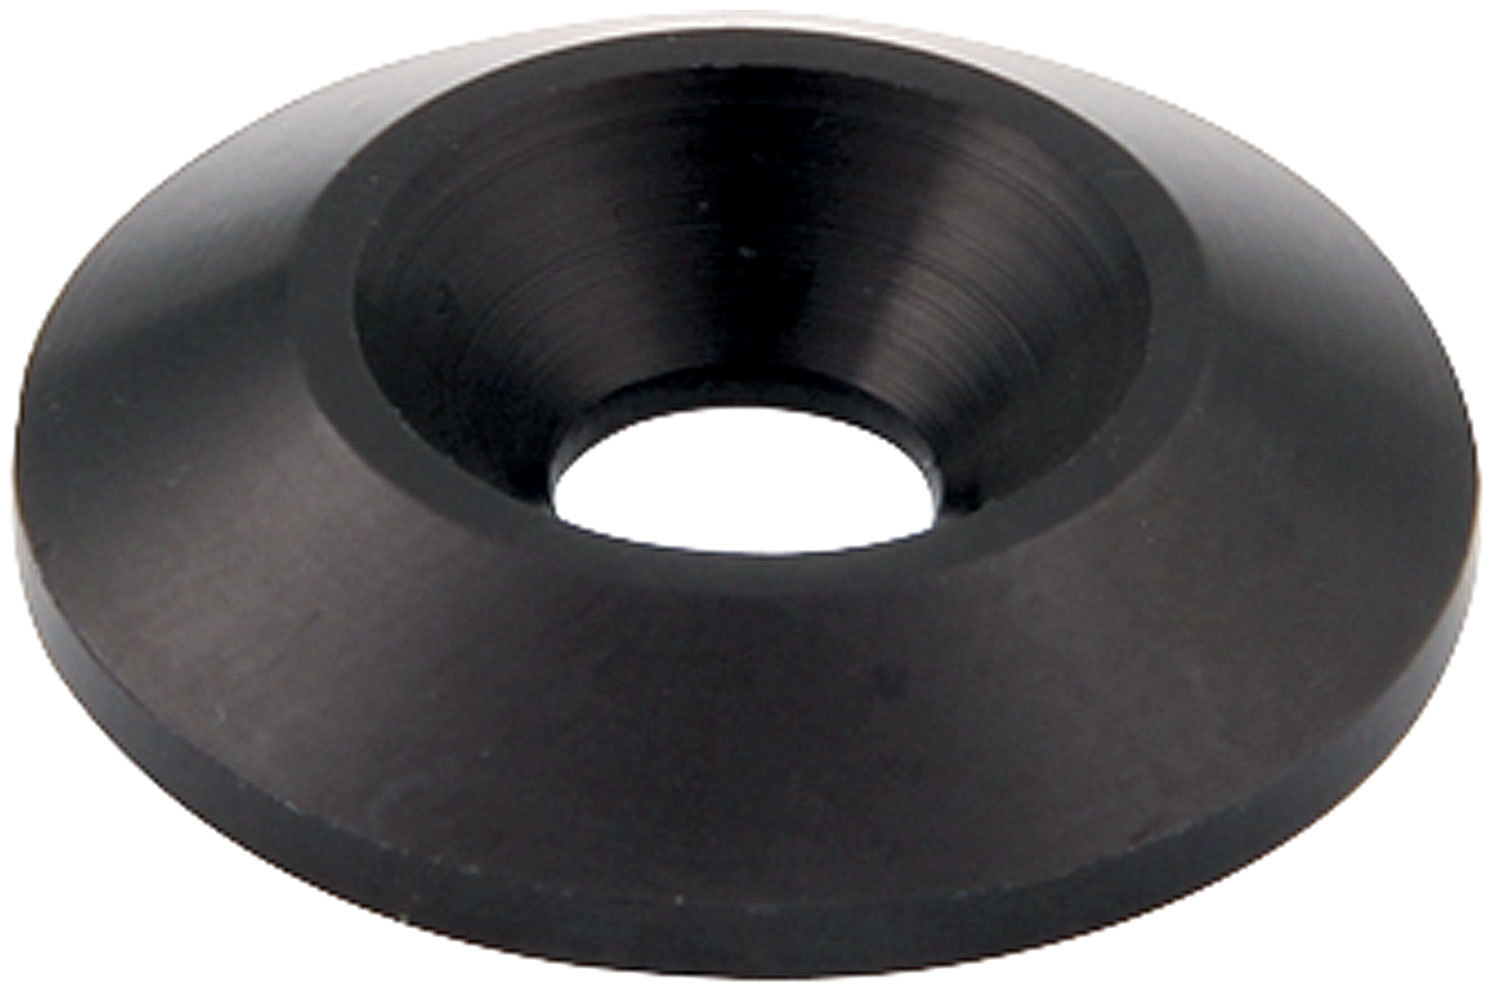 Allstar Performance 18665 - Countersunk Washer Blk 1/4in x 1-1/4in 10pk